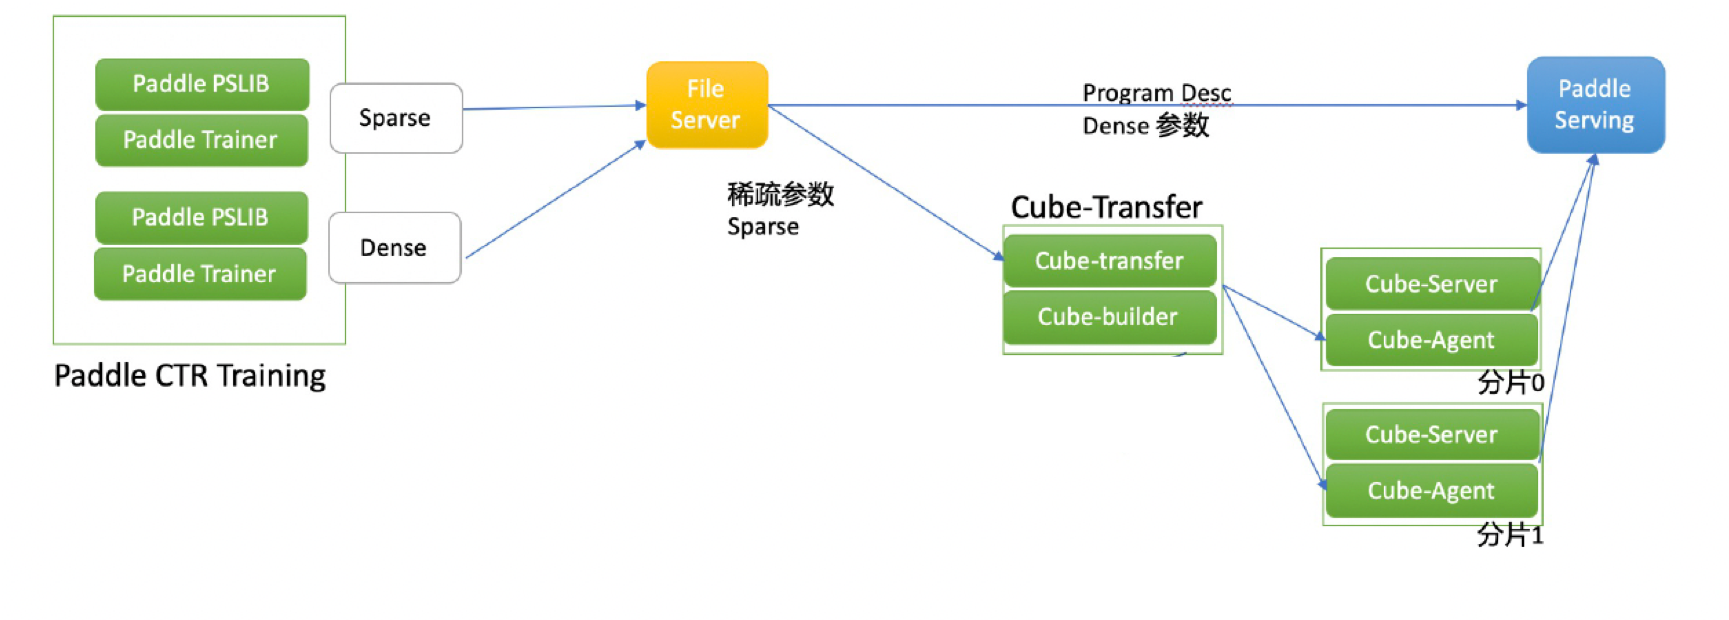 doc/Offical_Docs/images/8-1_Cube_Architecture_CN_1.png